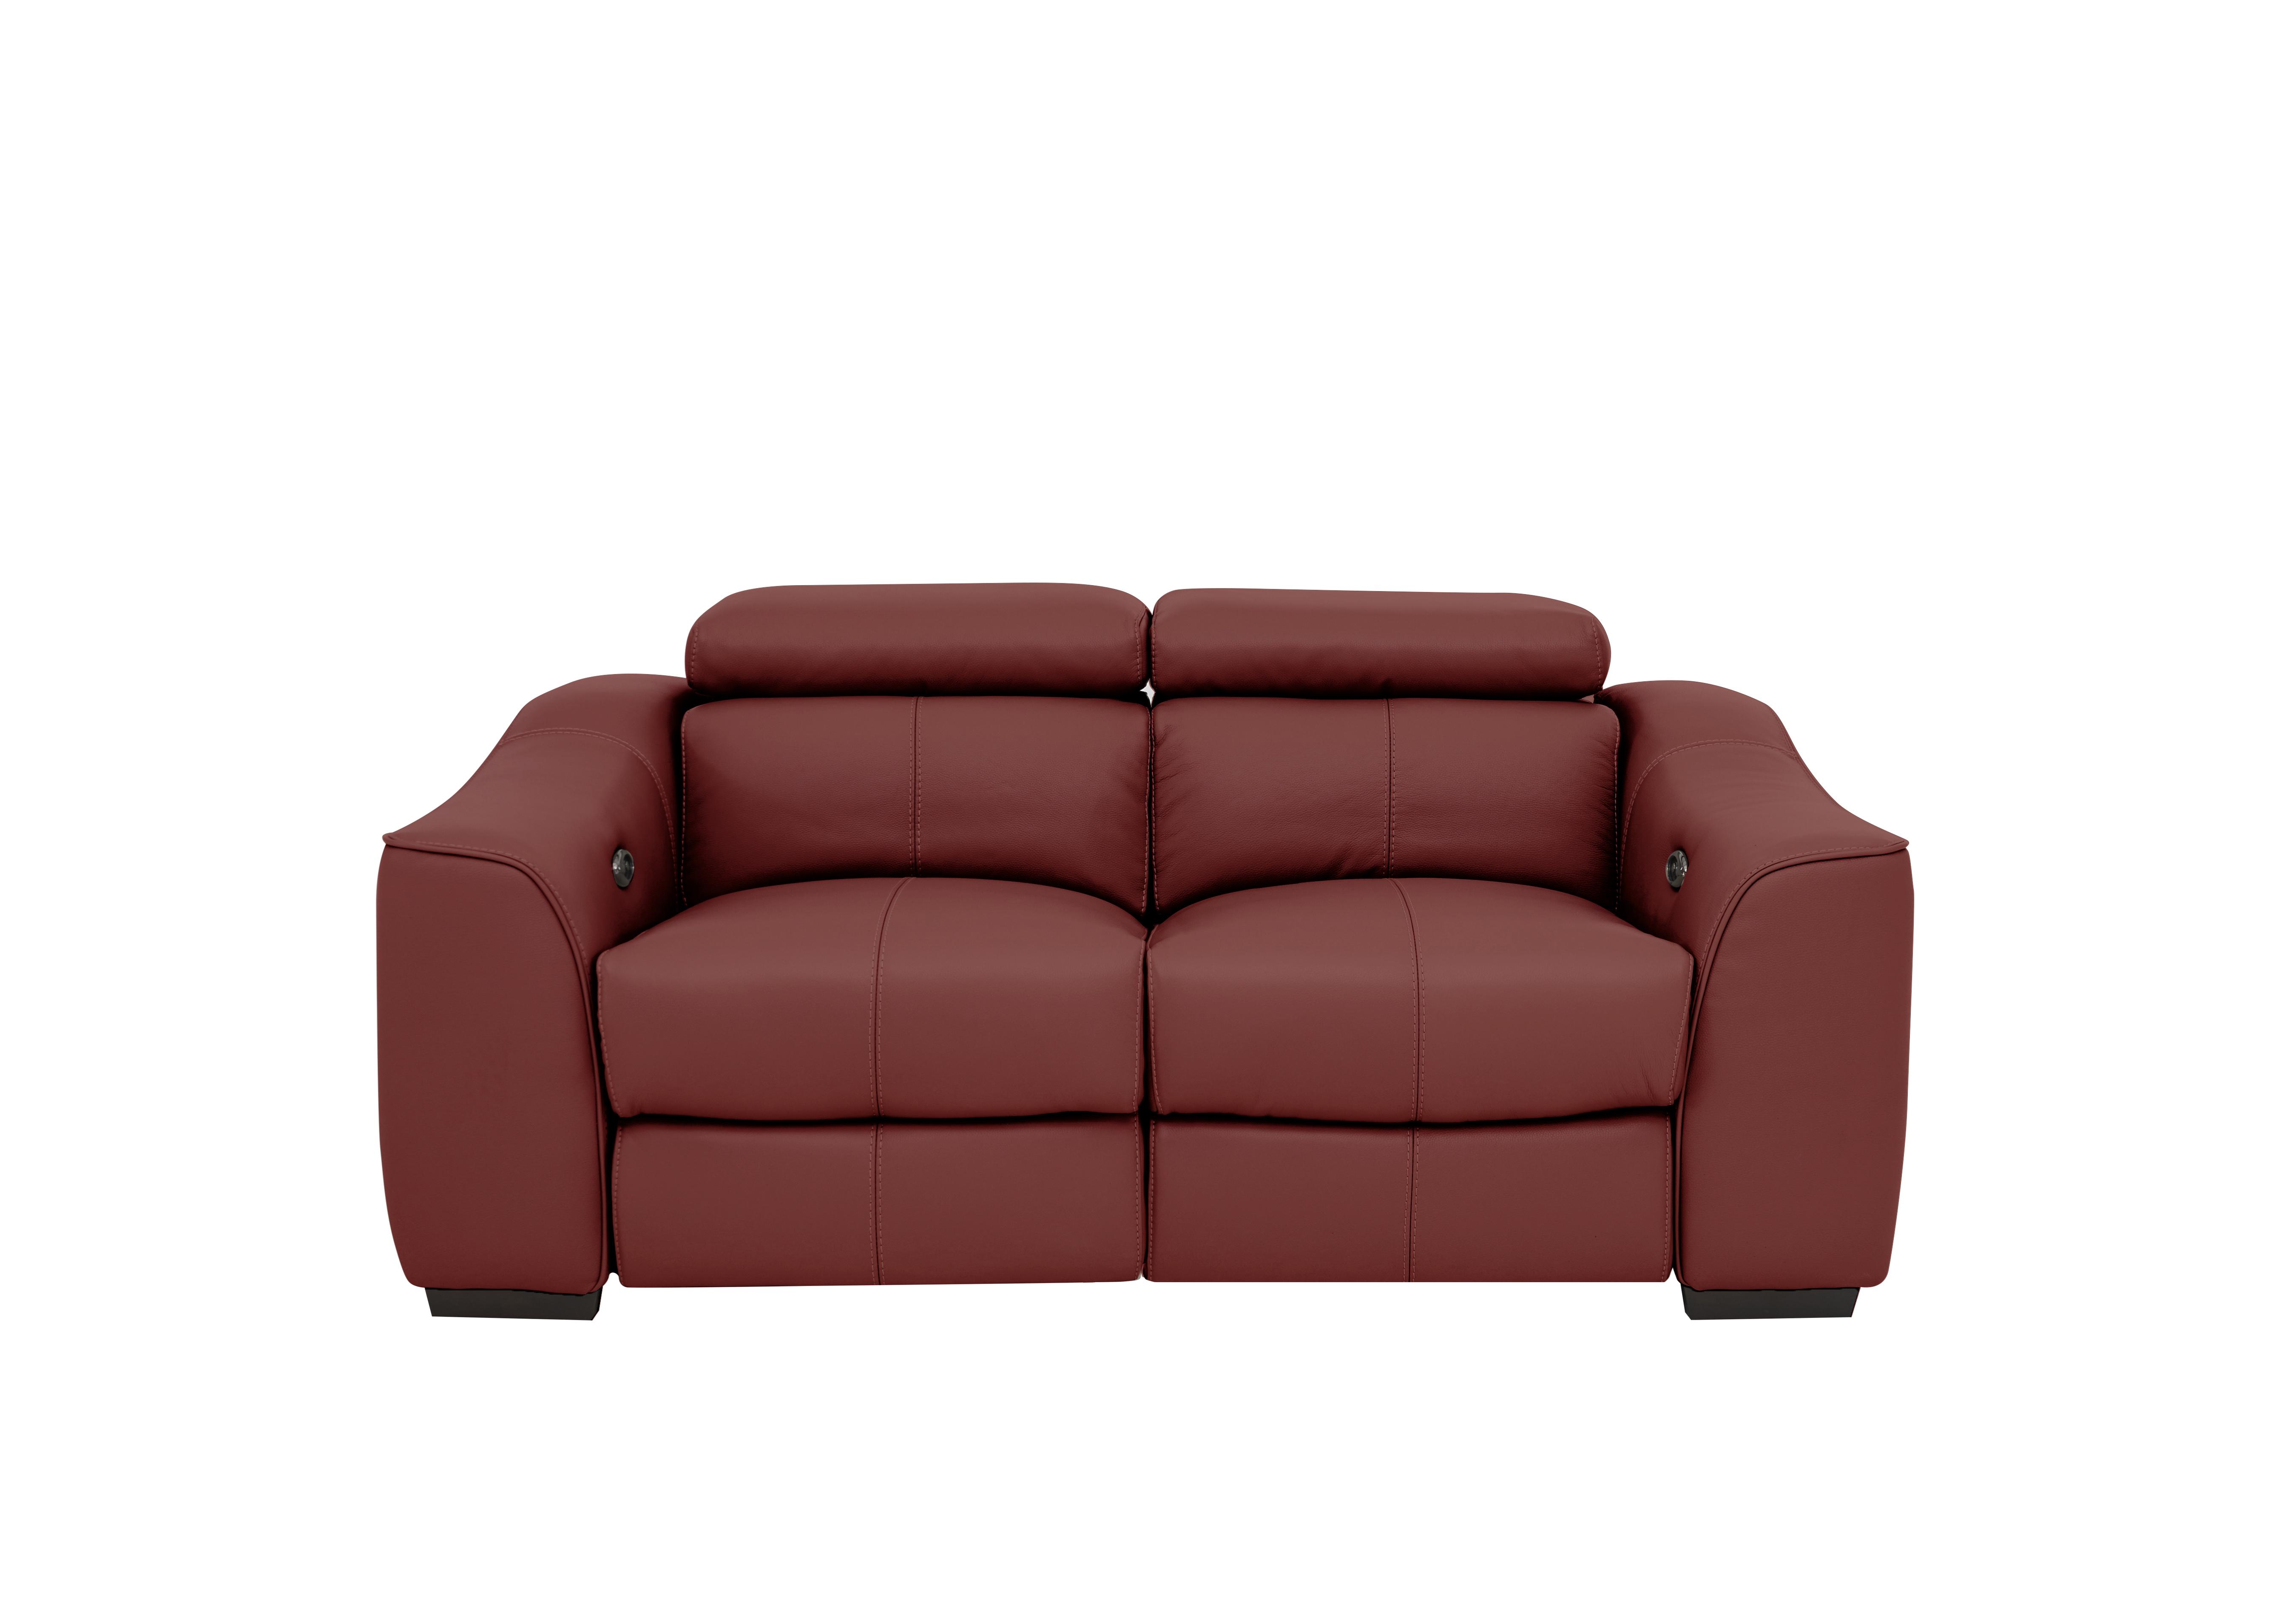 Elixir 2 Seater Leather Sofa in Bv-035c Deep Red on Furniture Village